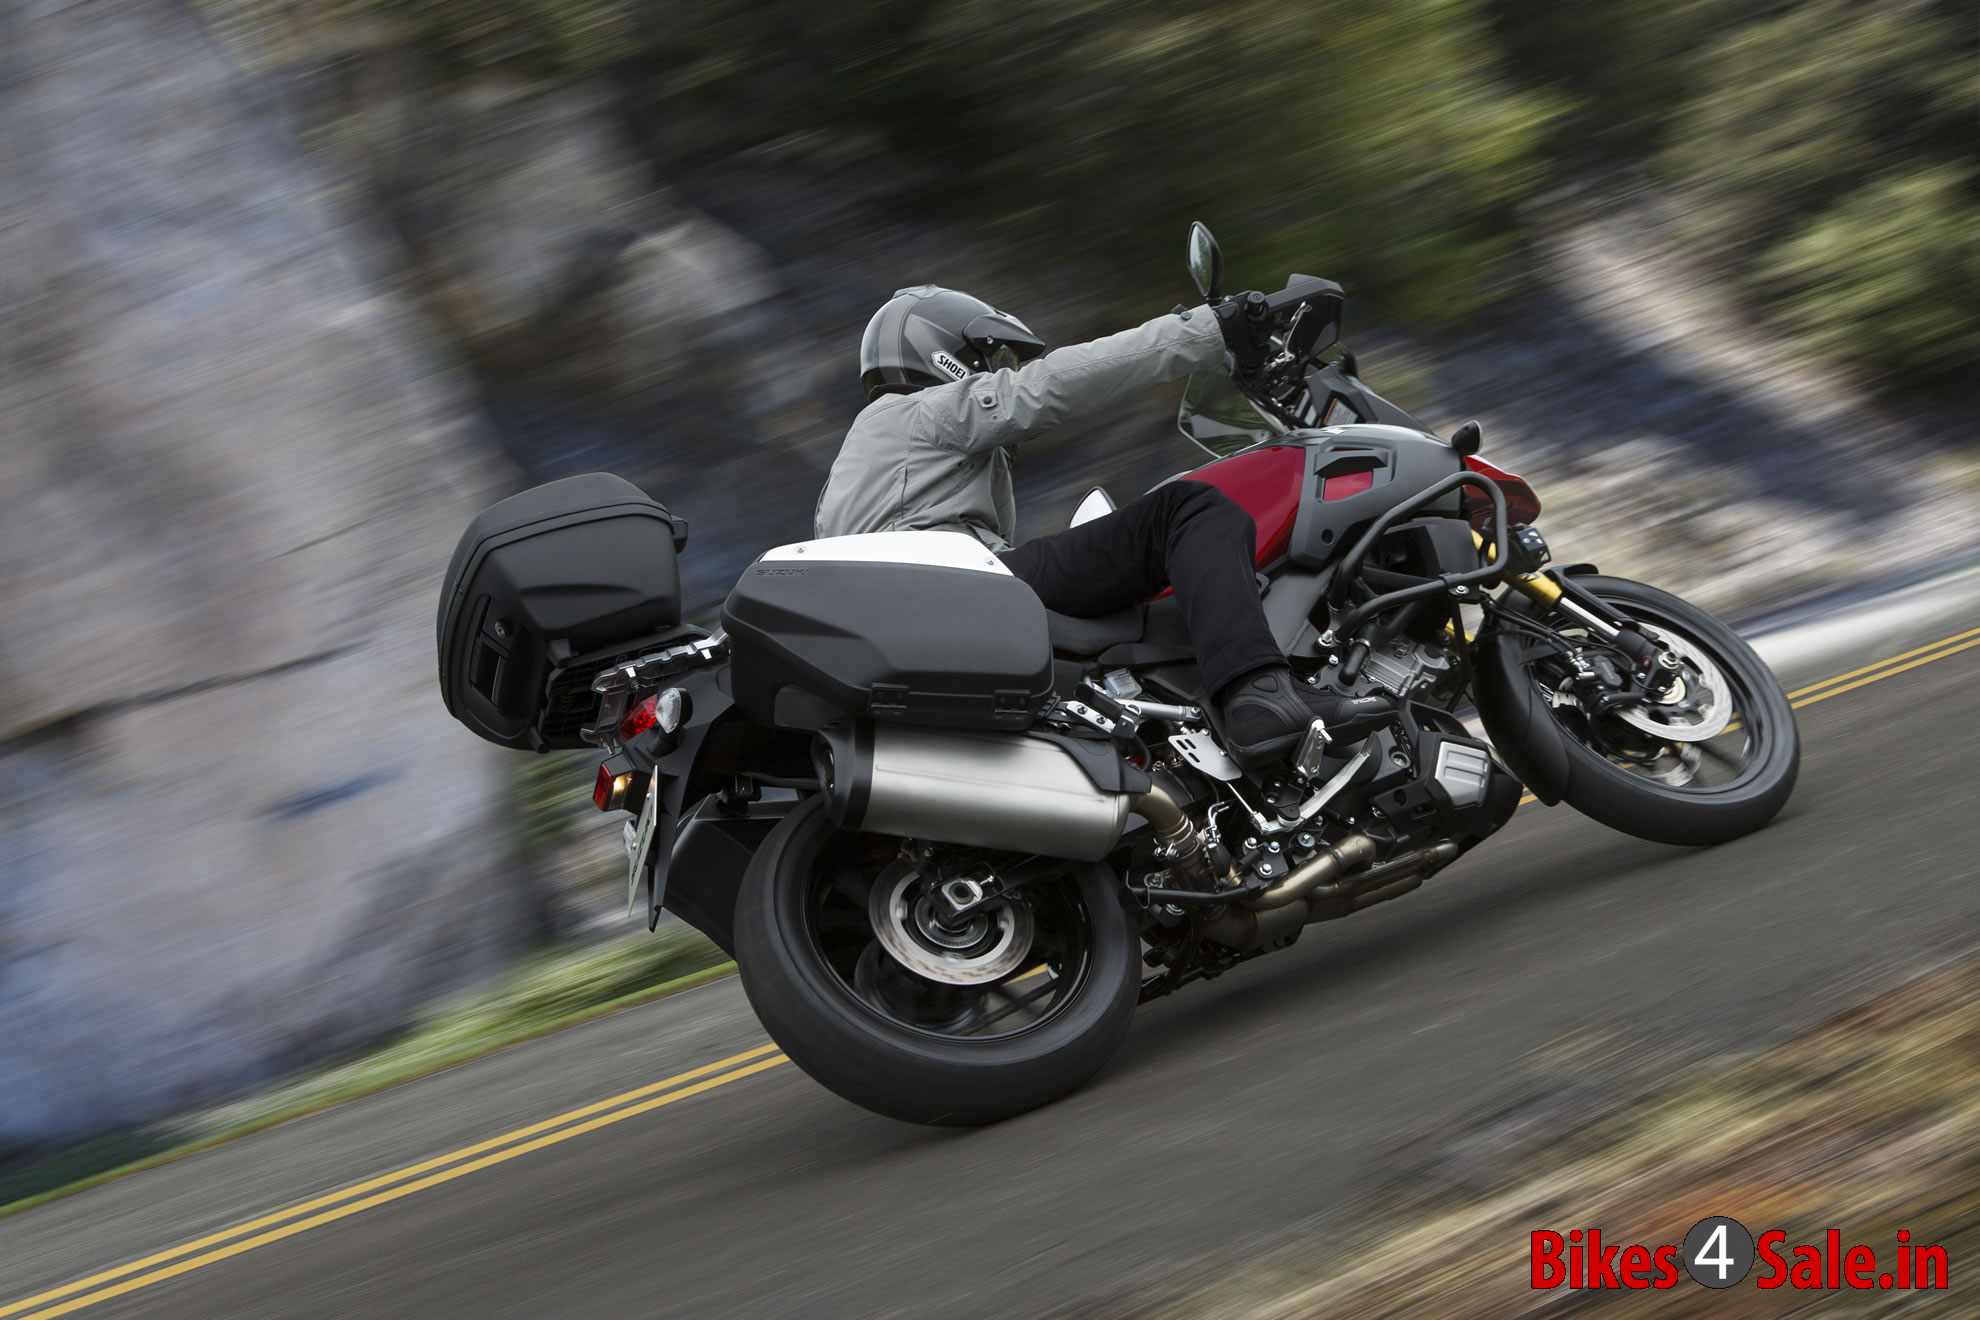 Suzuki V-Strom 1000 - Picture showing the angled side view of the Suzuki V Strom 1000 climbing the high range road